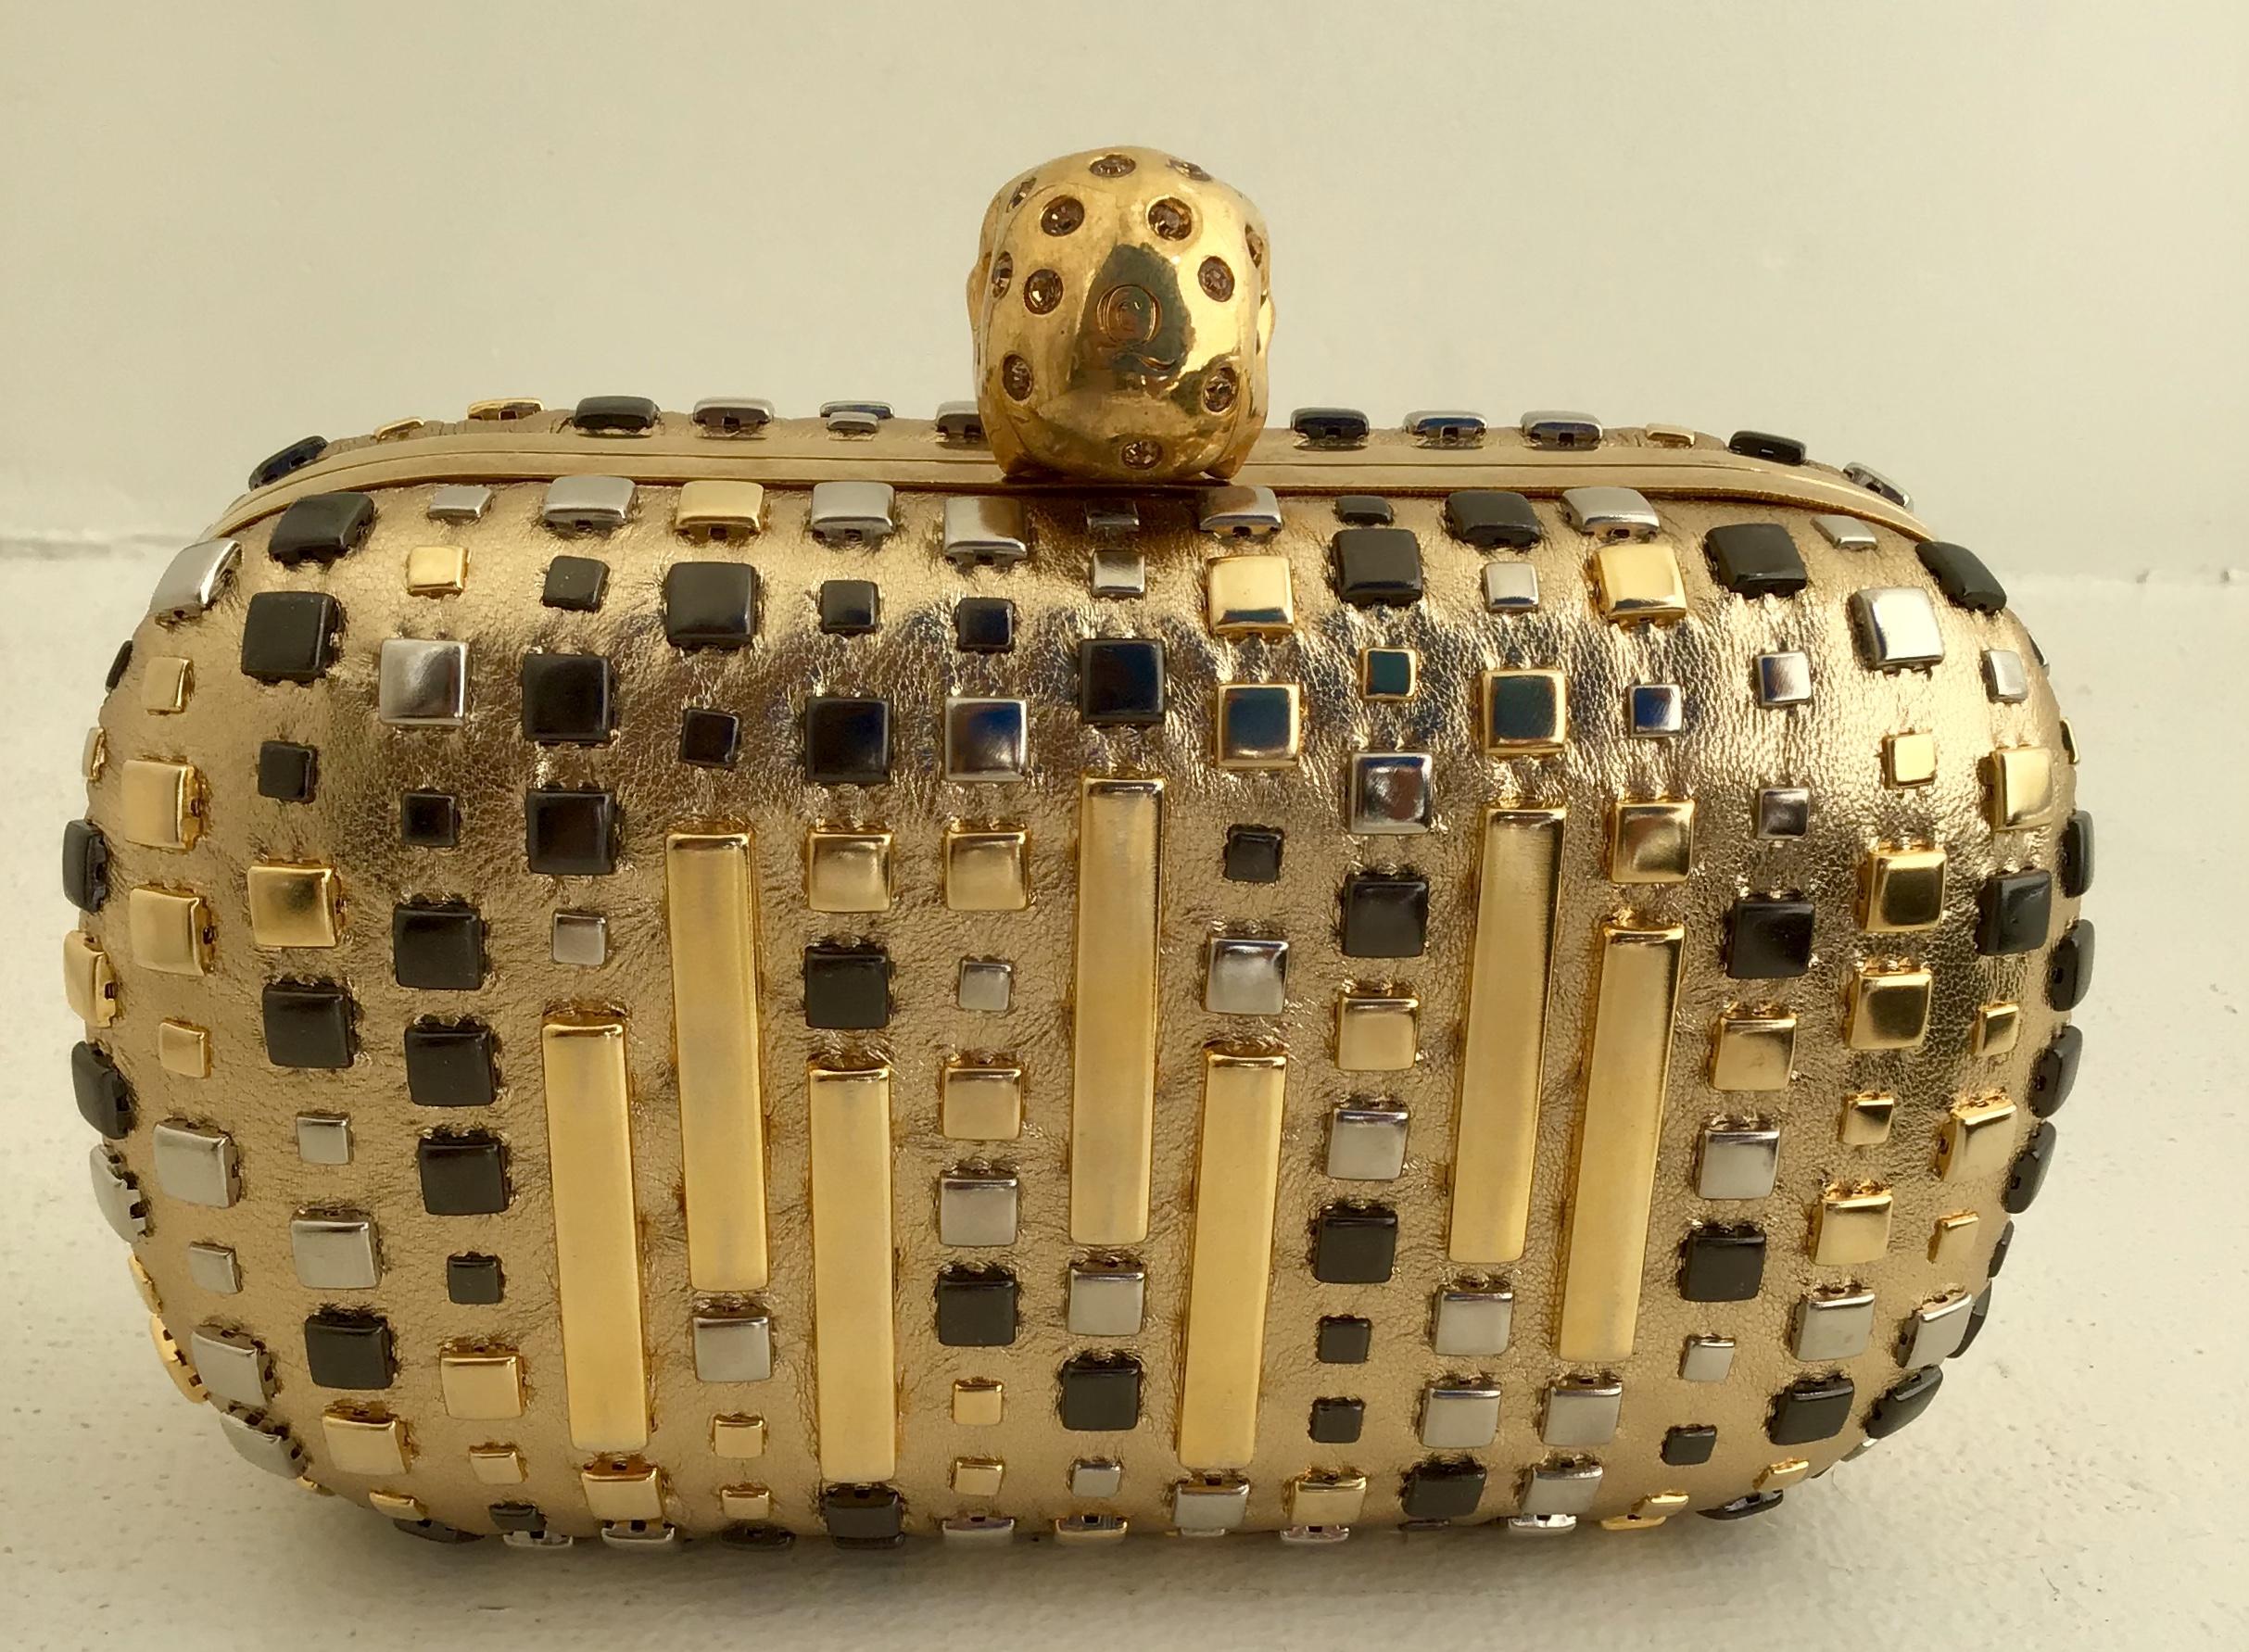 Alexander McQueen Skull Studded Metallic Leather Box Clutch. The outer shell is a metallic gold lamb leather with multicolored studs. Gold jeweled skull flip lock closure. The inner shell has a black leather lining. 